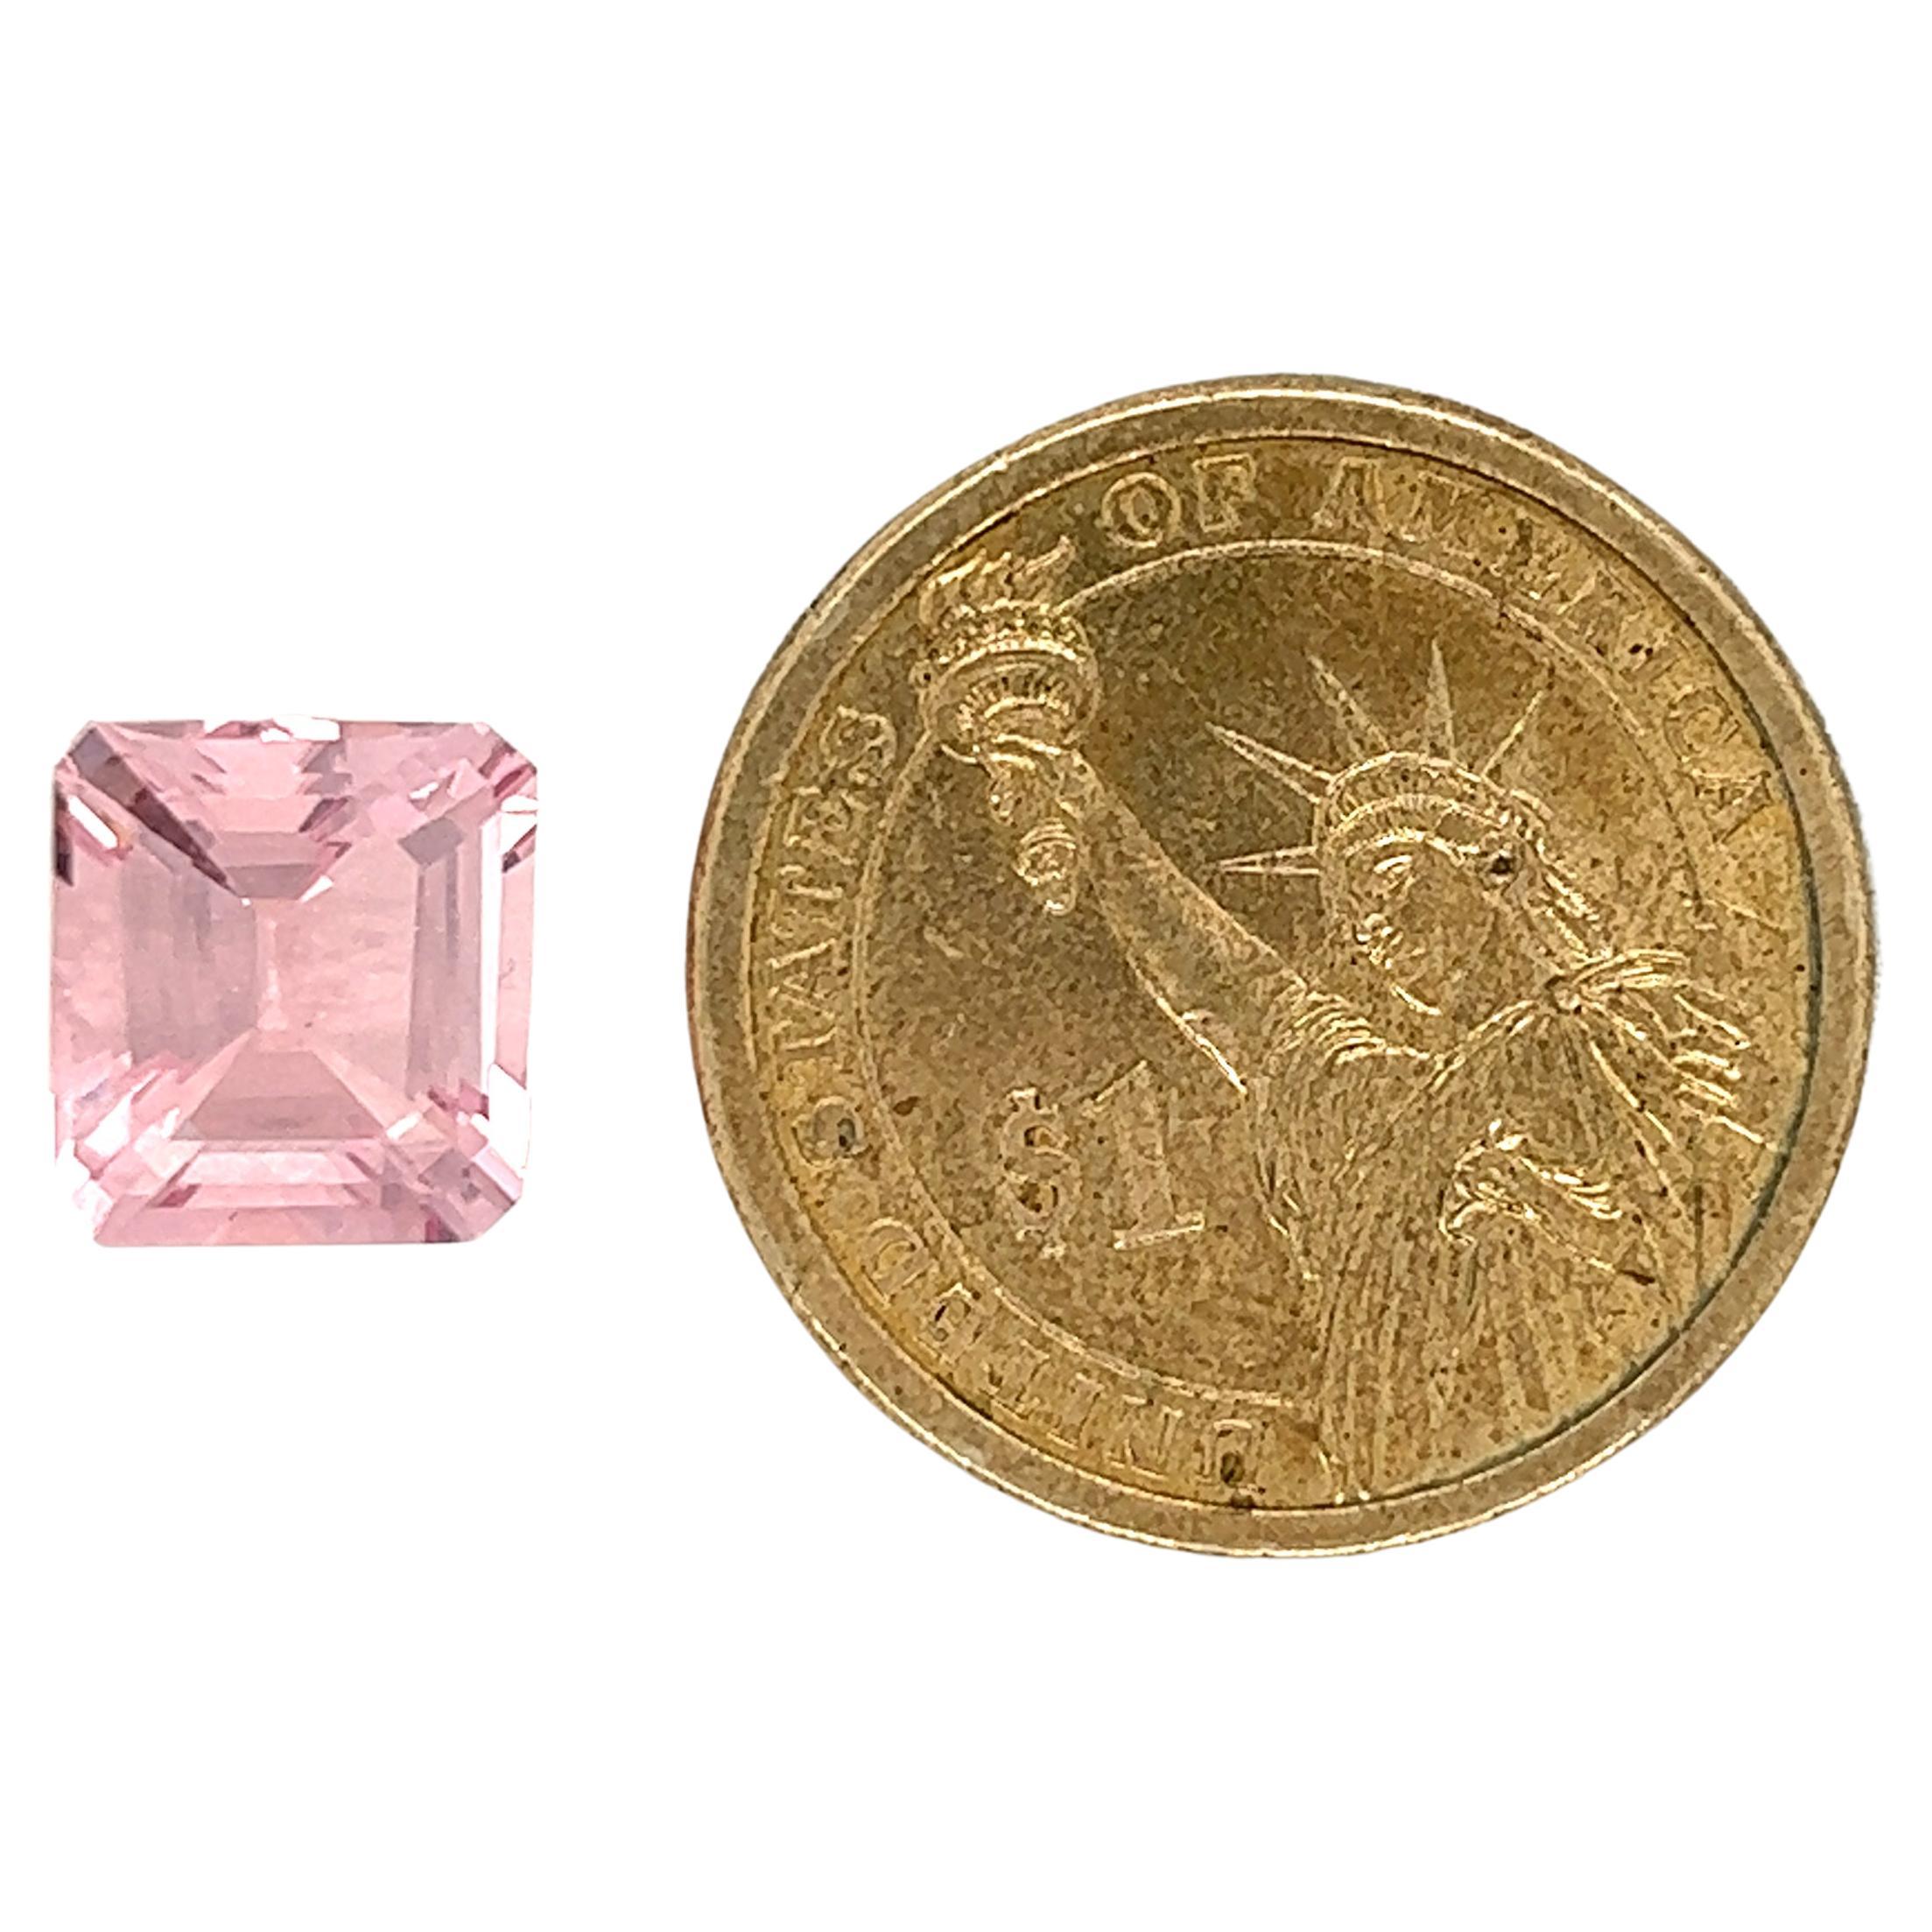 SKU - 50015
Stone : Natural pink morganite
Shape : Octagon
Clarity -  Eye clean
Grade -  AAA
Weight - 6.50 Cts
Length * Width * Height - 11.6*10.6*7.5
Price - $ 2350

Morganite is a gemstone that brings the prism of love in all its incarnations.